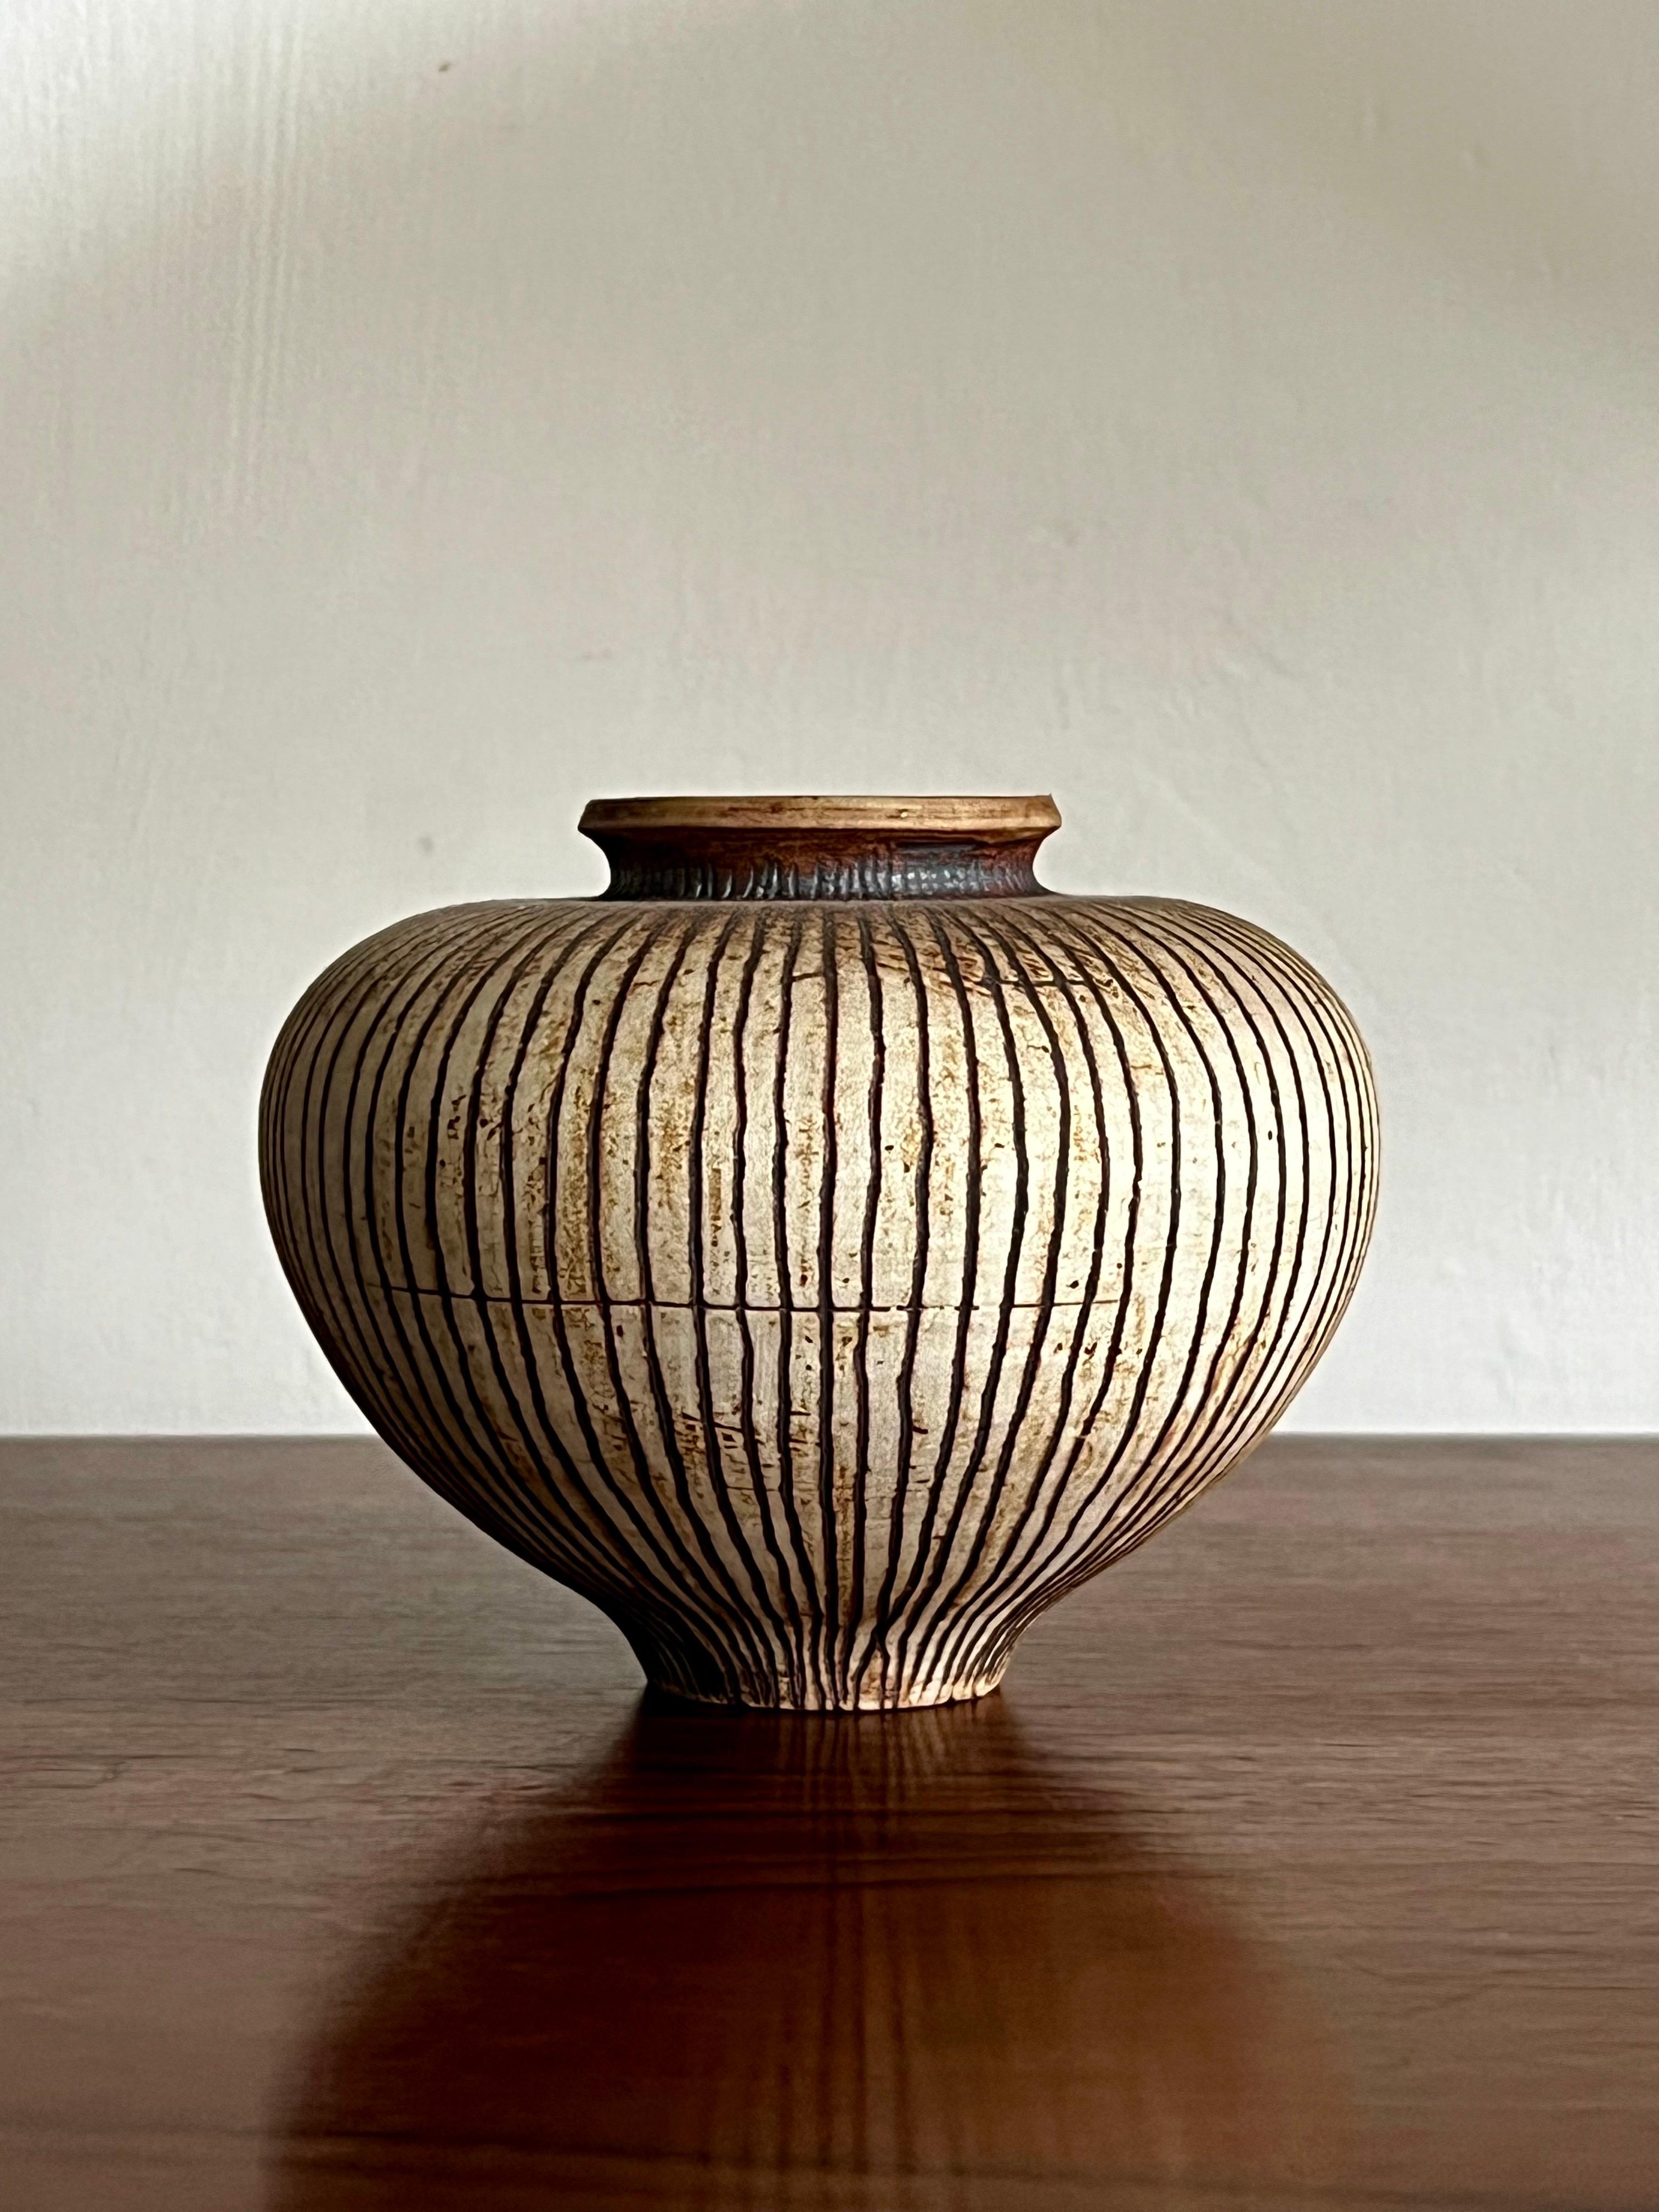 A small ceramic vessel by renowned British potter Waistel Cooper (1913-2009).

The organic shape is decorated with handmade vertical - and occasional lateral - sgraffito lines - in natural tones of cream and brown, best shown in the main image.